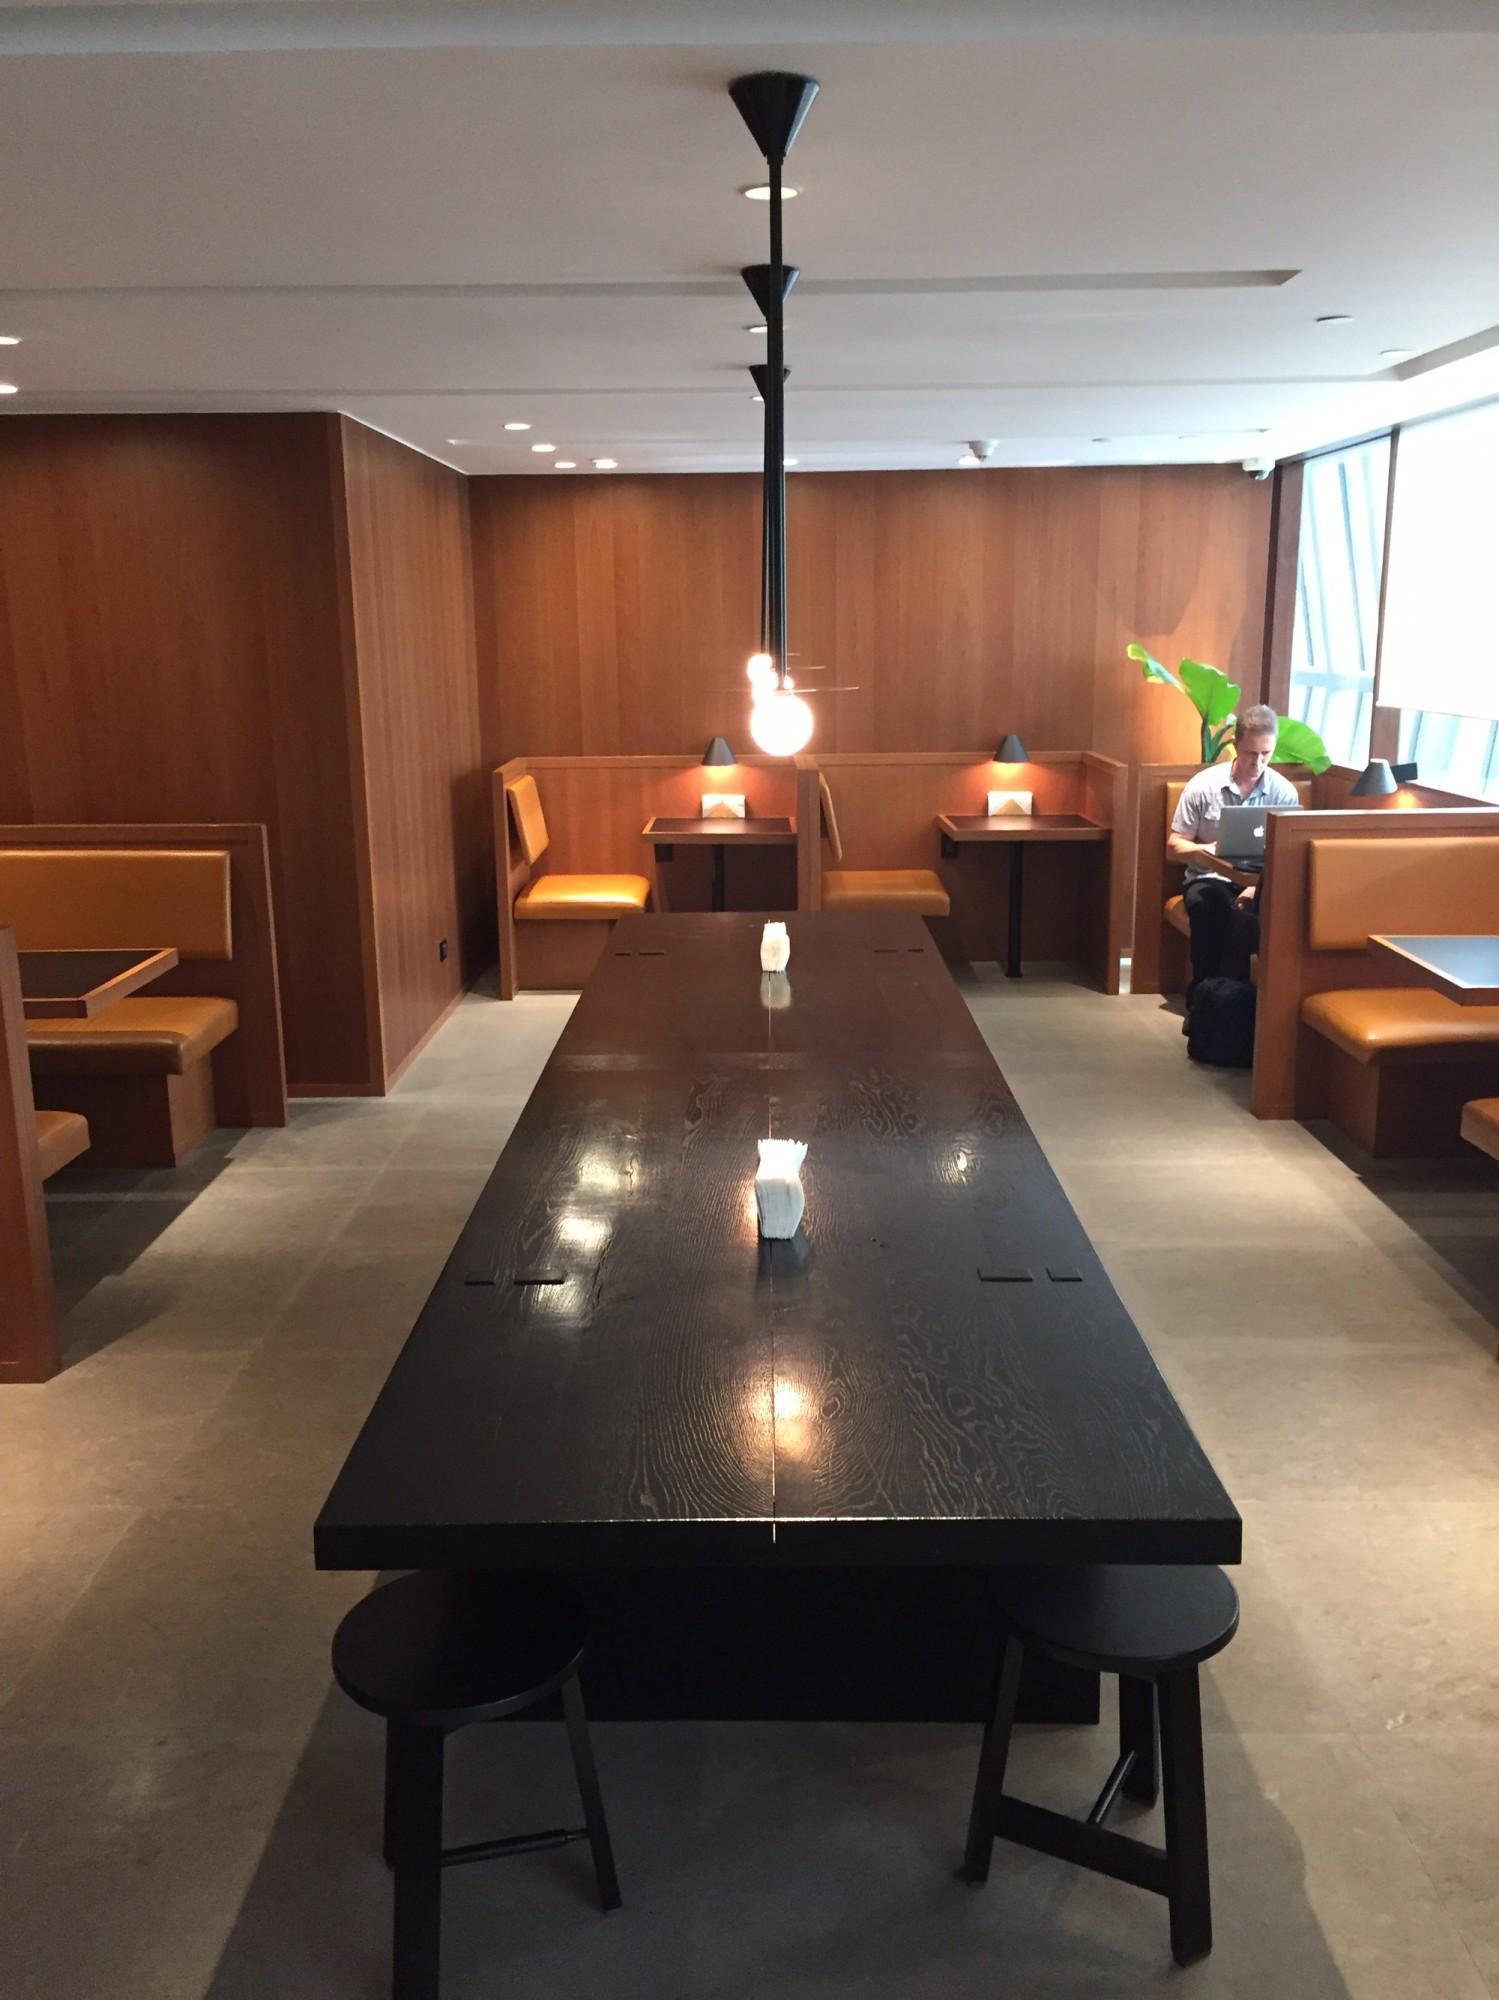 Cathay Pacific First and Business Class Lounge image 8 of 69